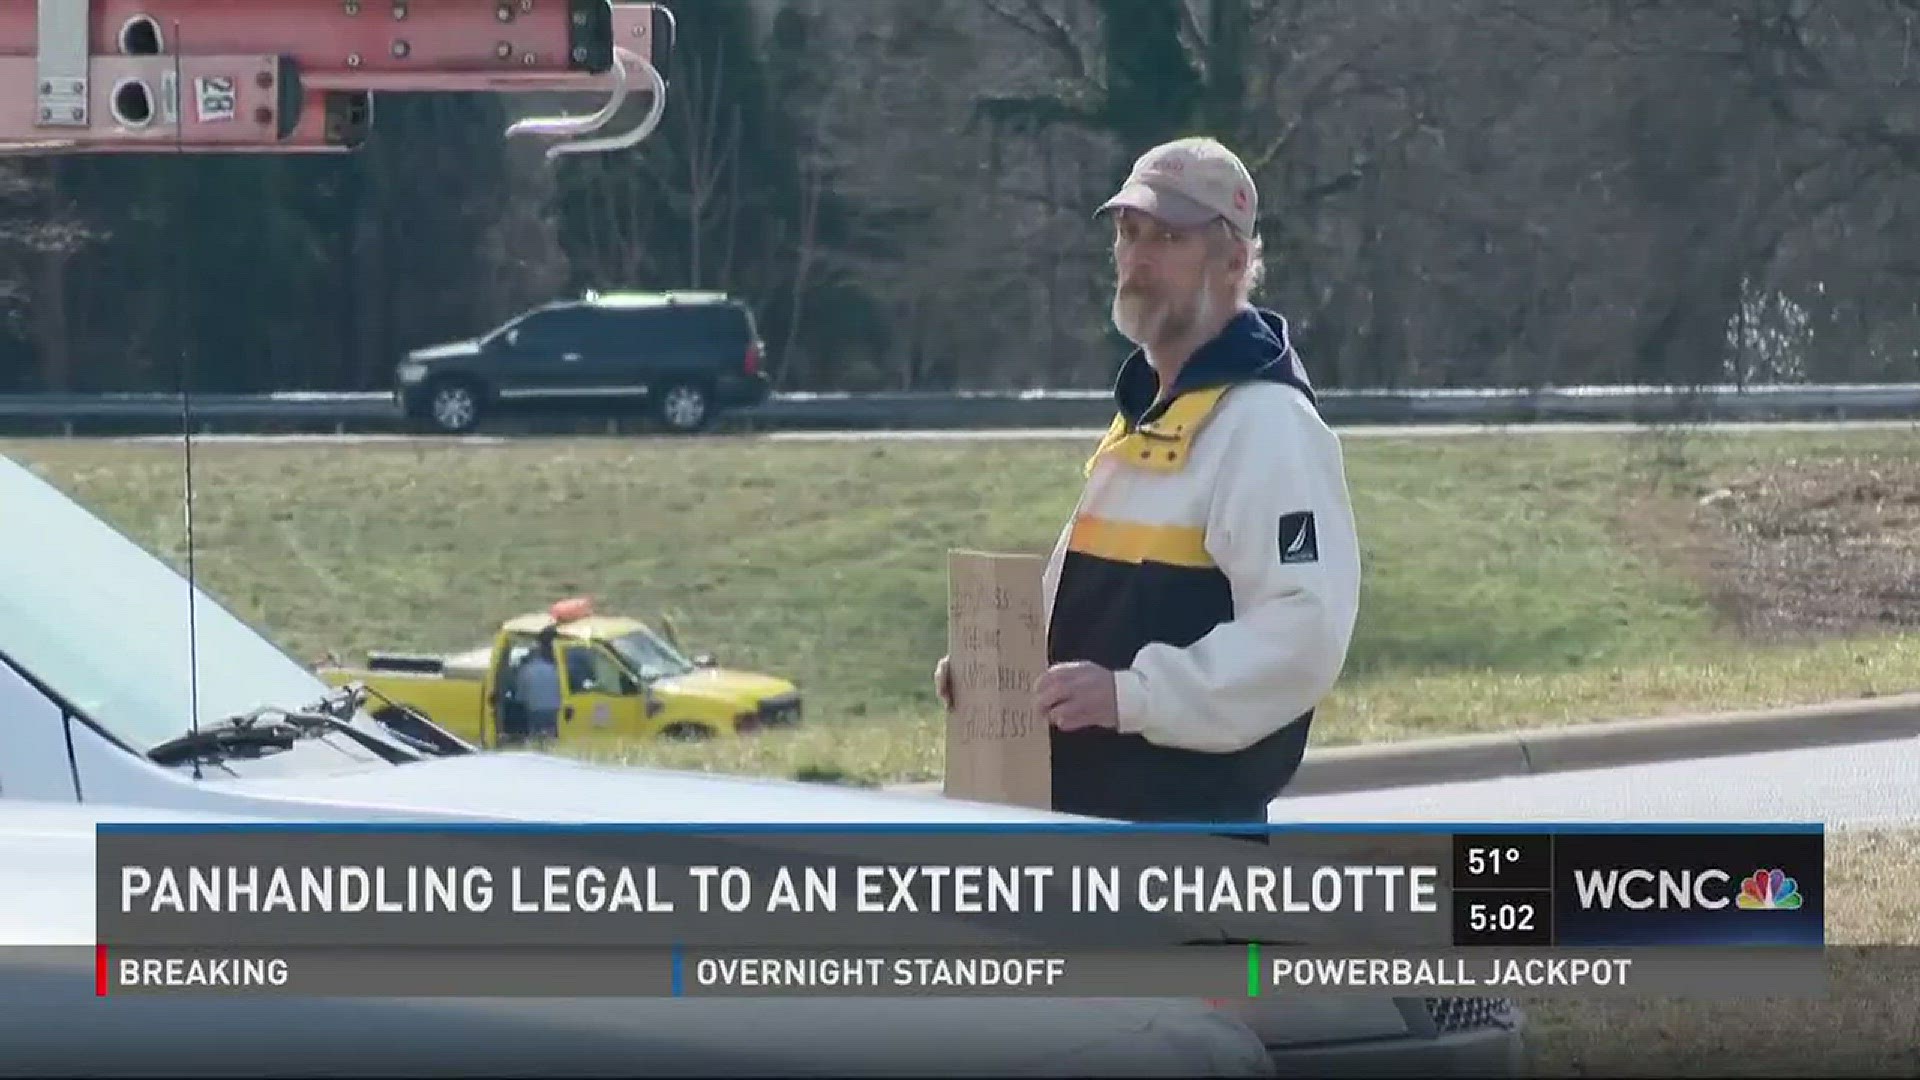 Panhandling legal to an extent in Charlotte